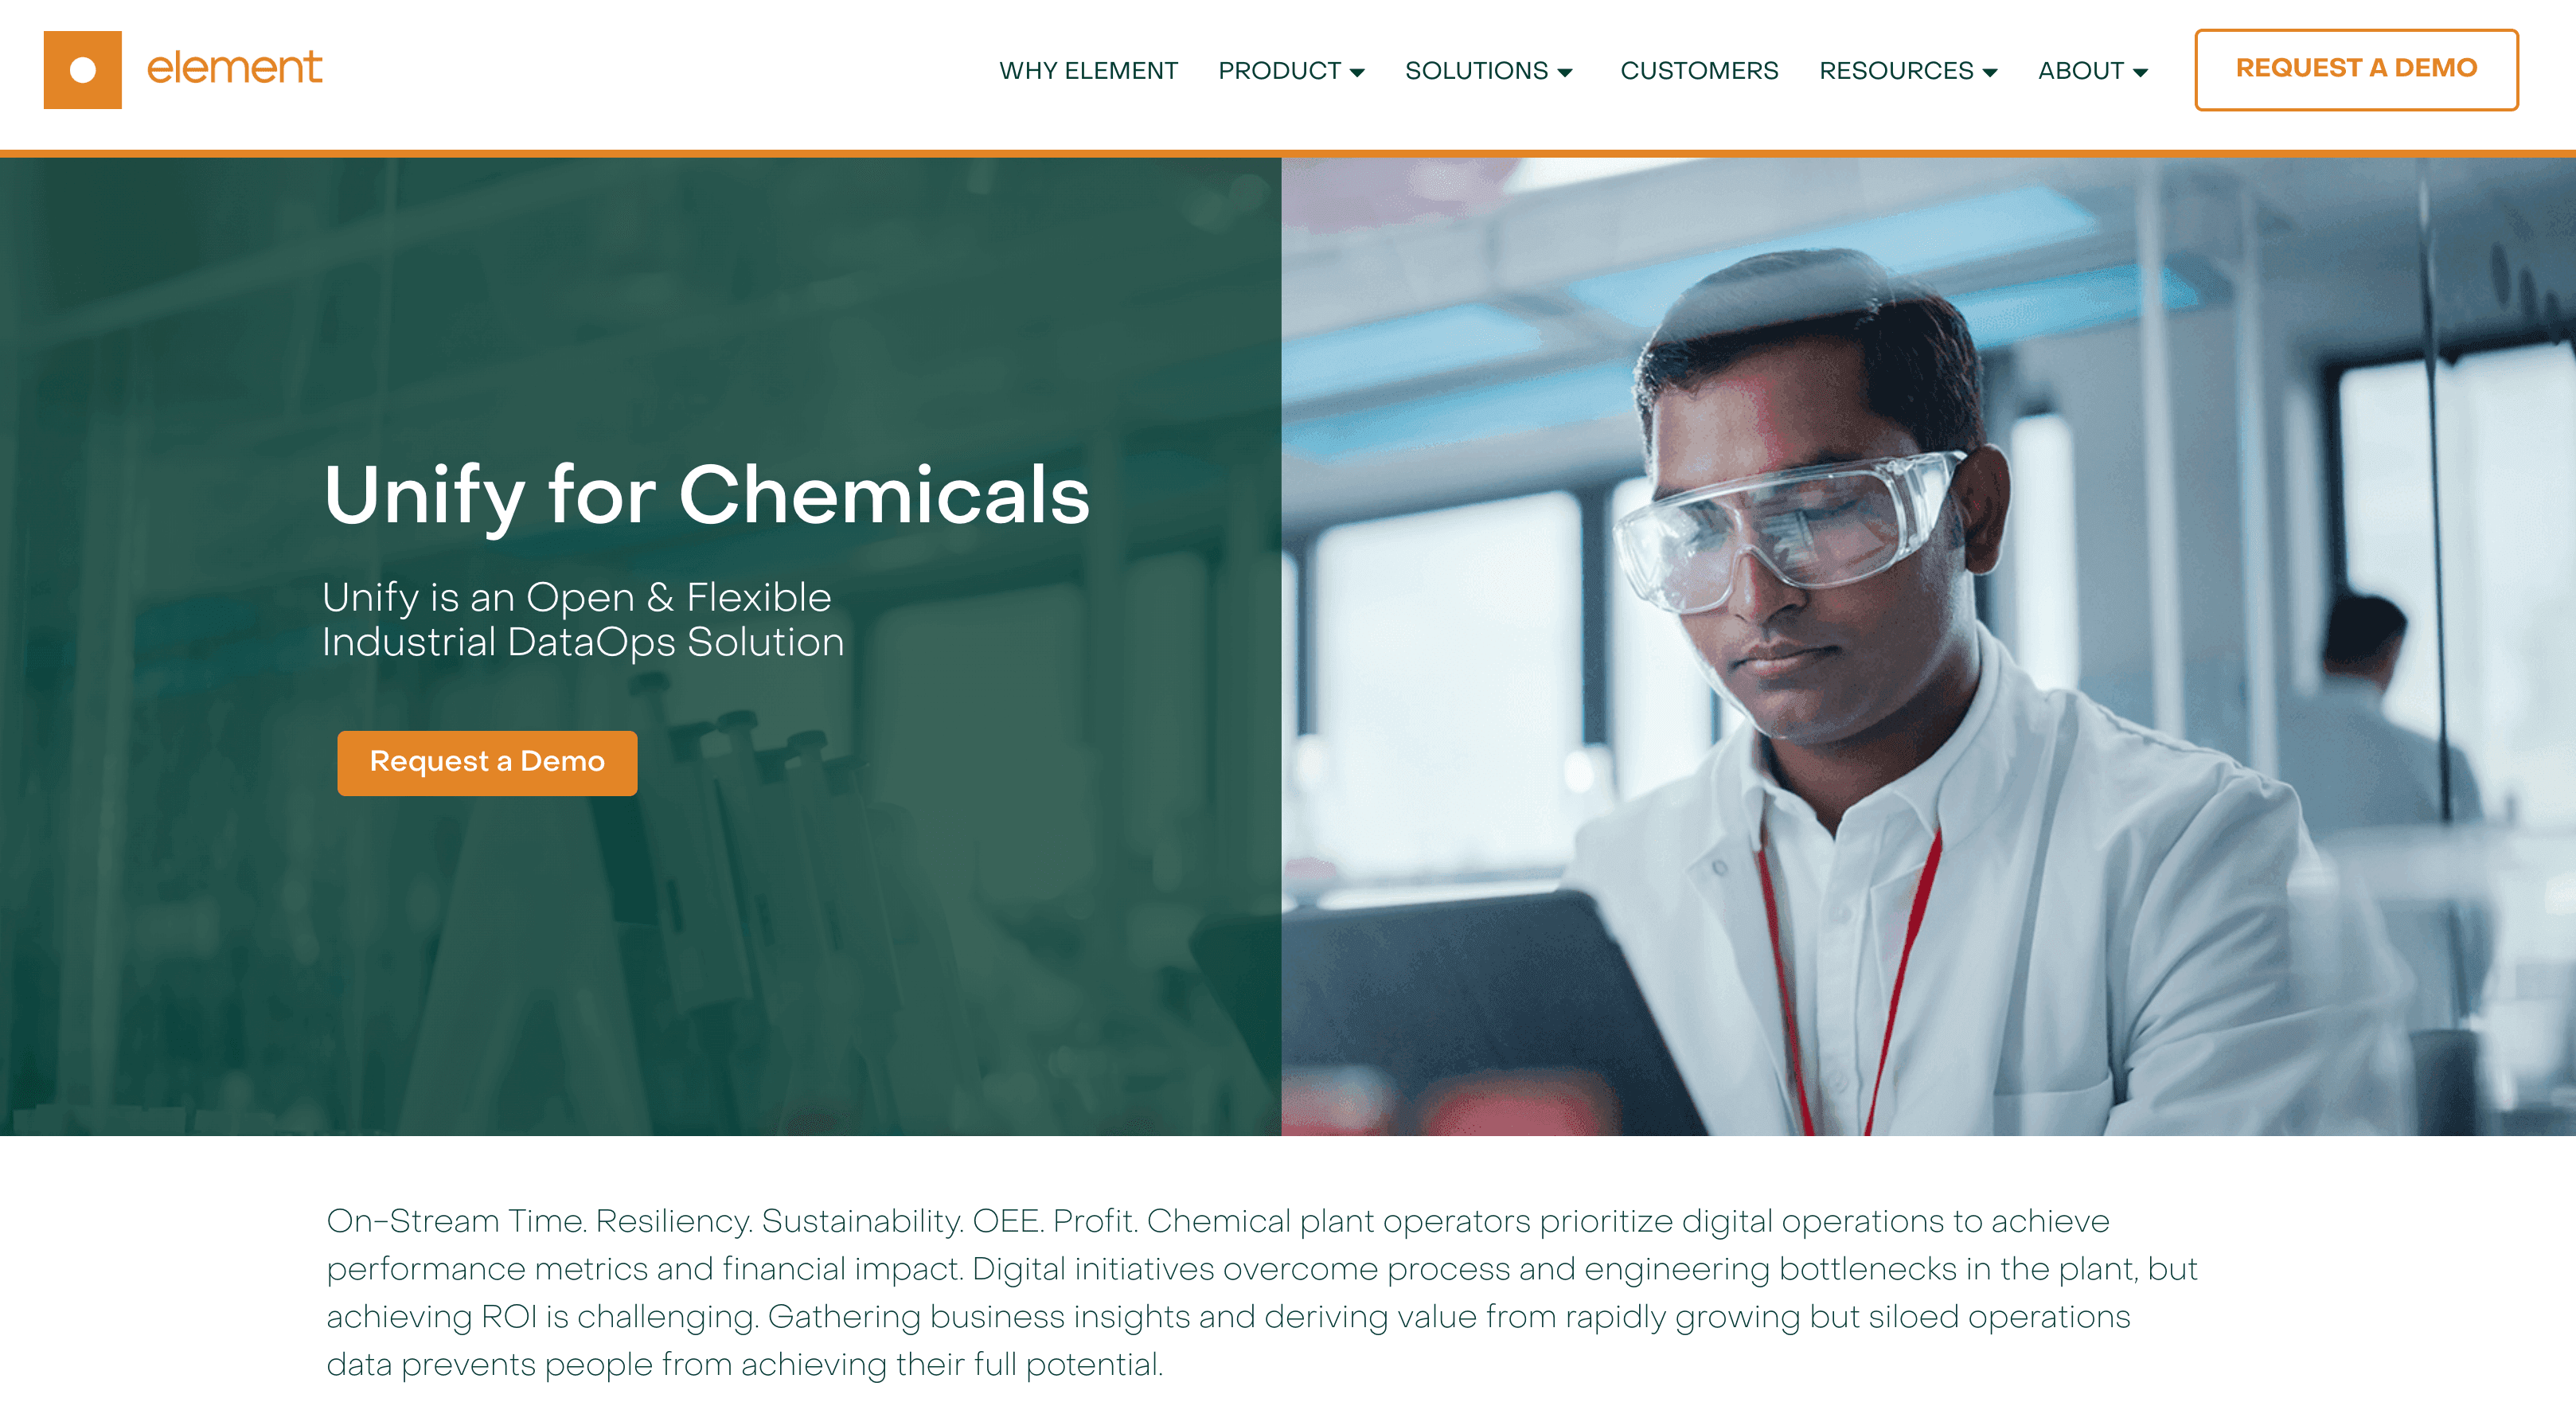 Product Unify for Chemicals image